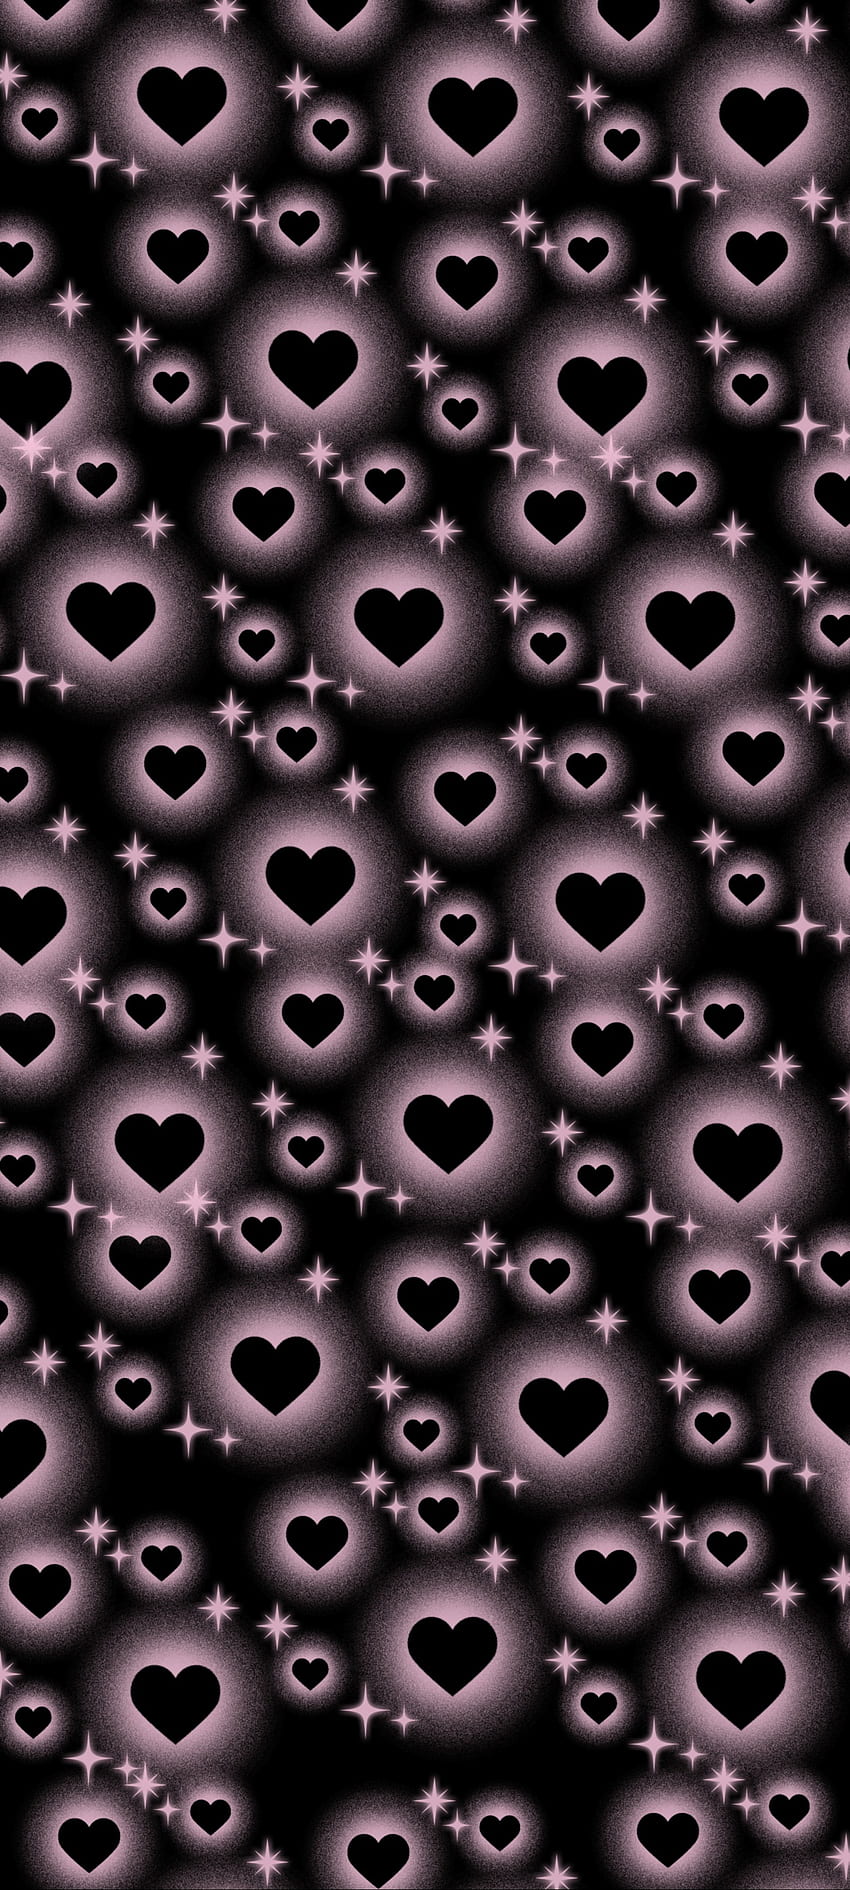 118045 Pink Hearts On Black Background Images Stock Photos  Vectors   Shutterstock